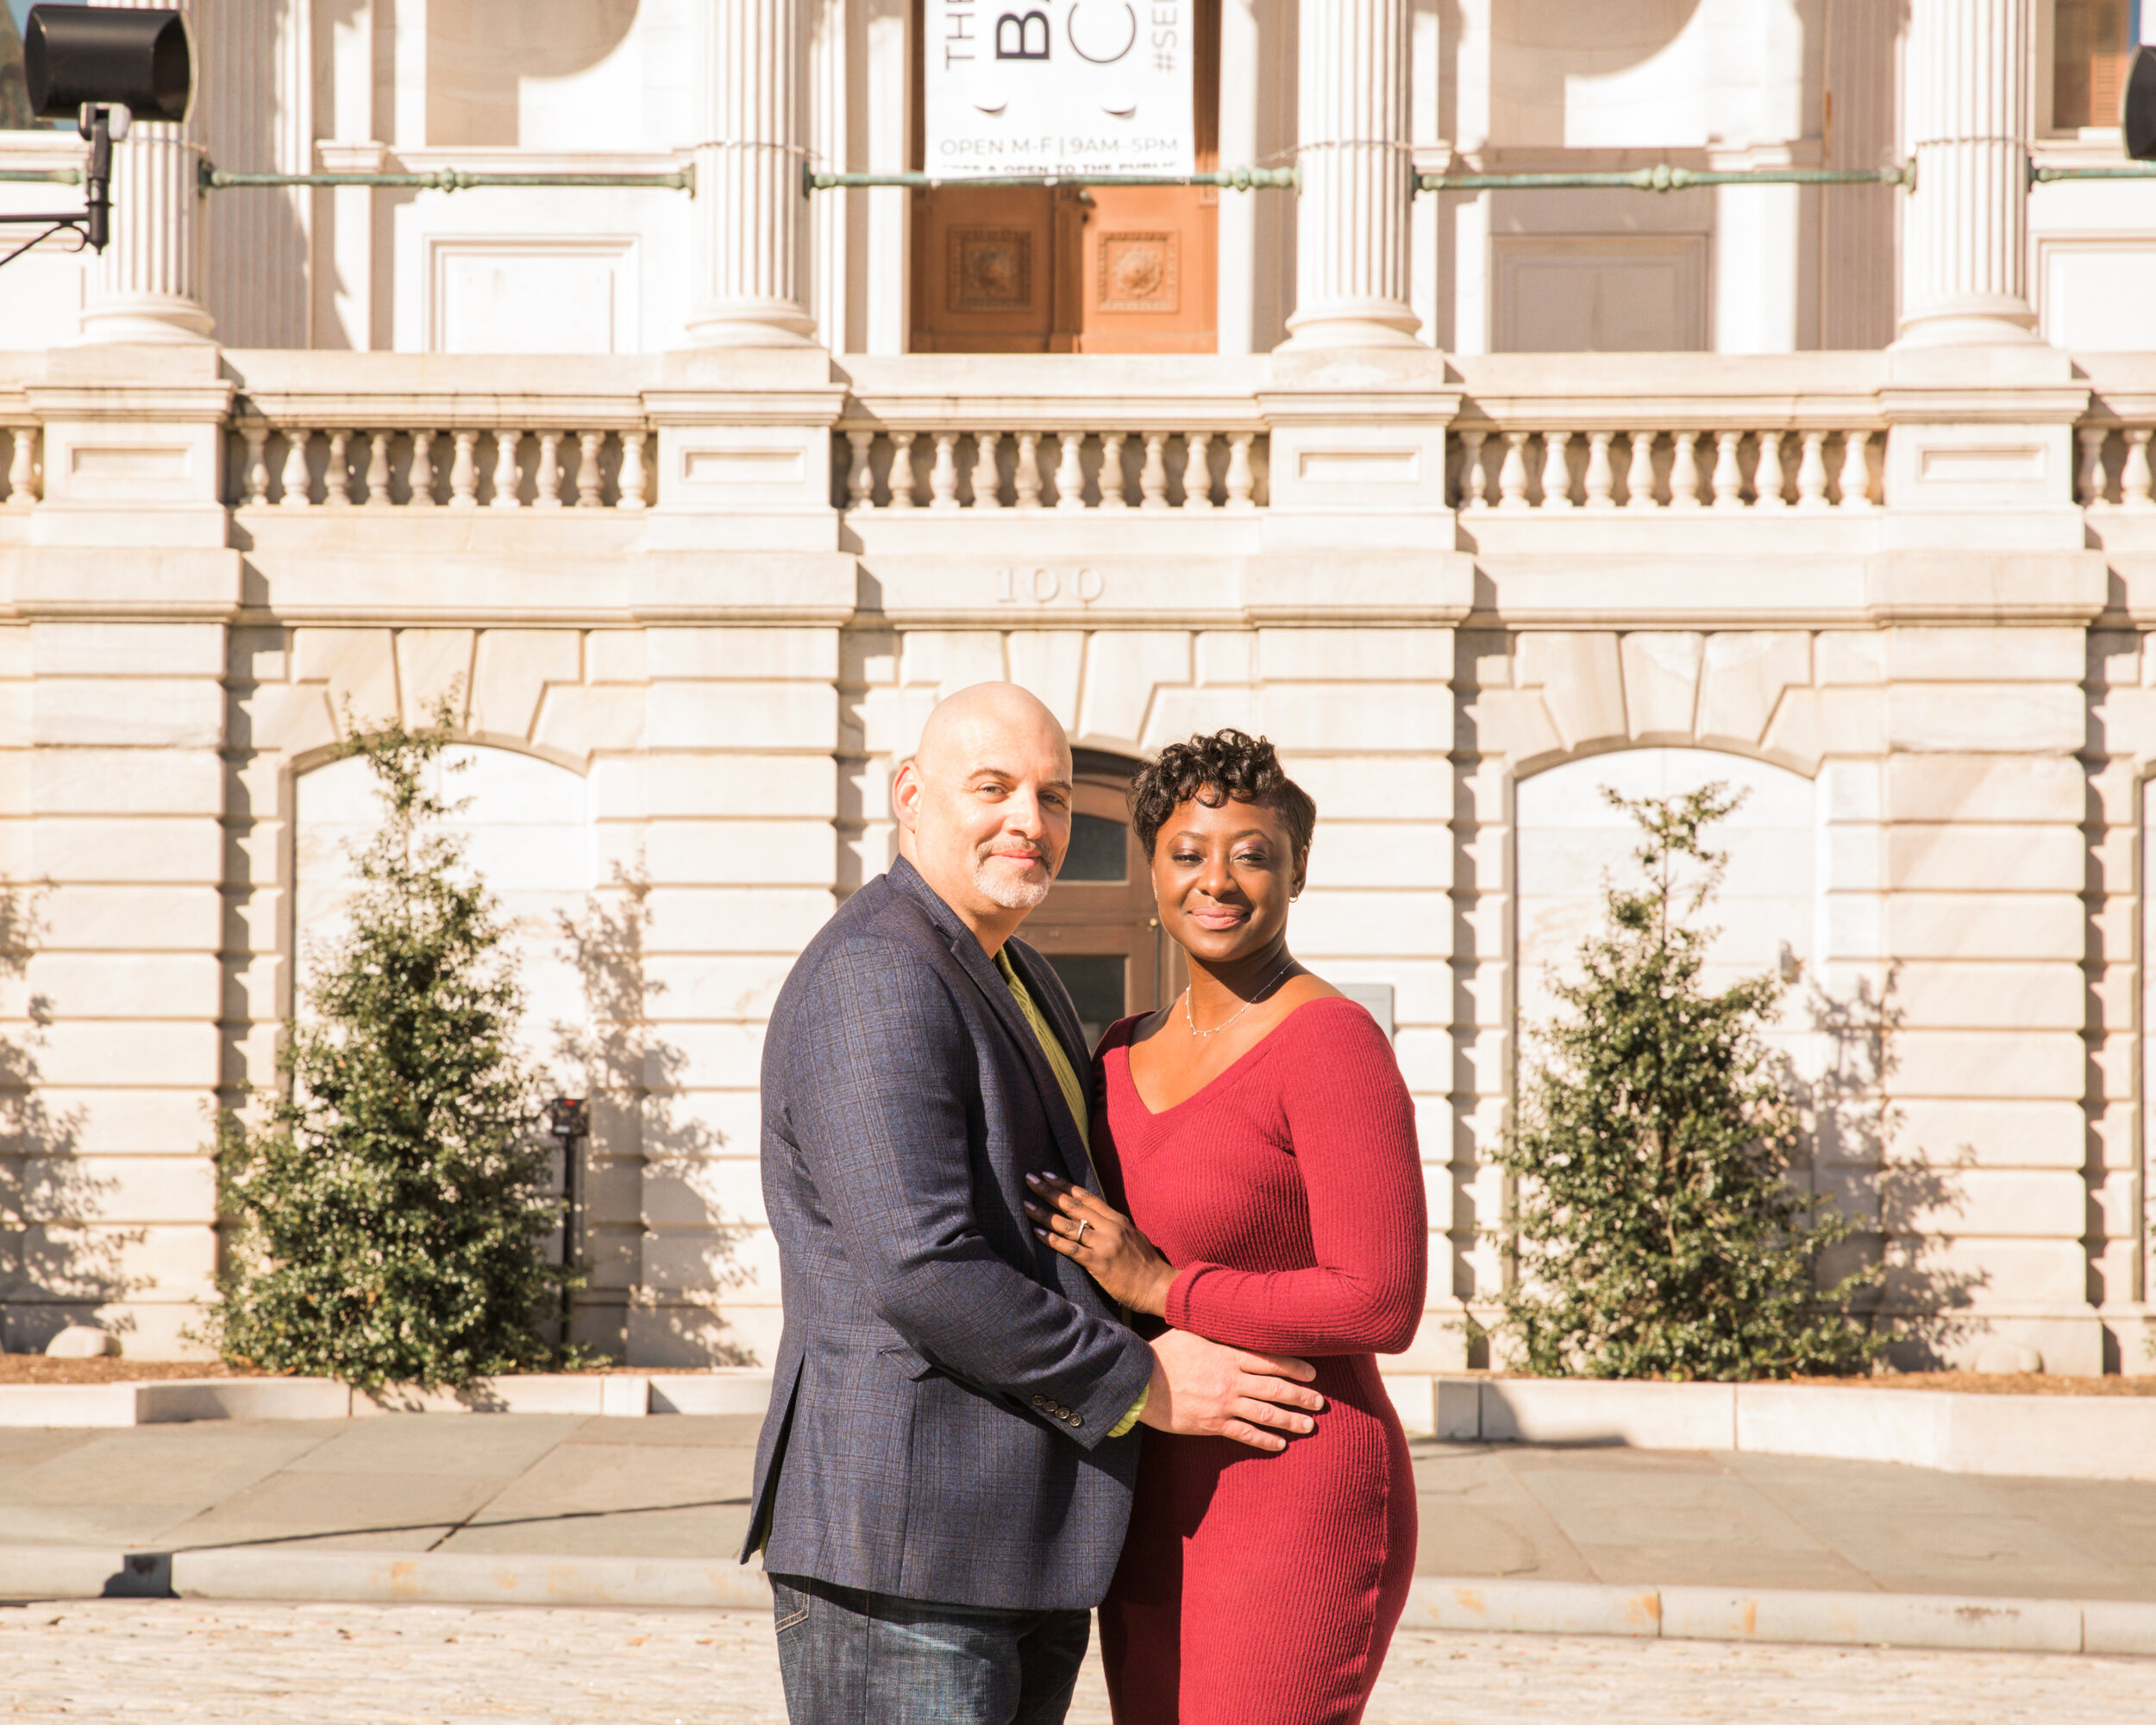 Beautiful Engagement Session at Baltimore City Hall by Baltimores Best Wedding Photographers Megapixels Media Black Wedding Photographers-45.jpg